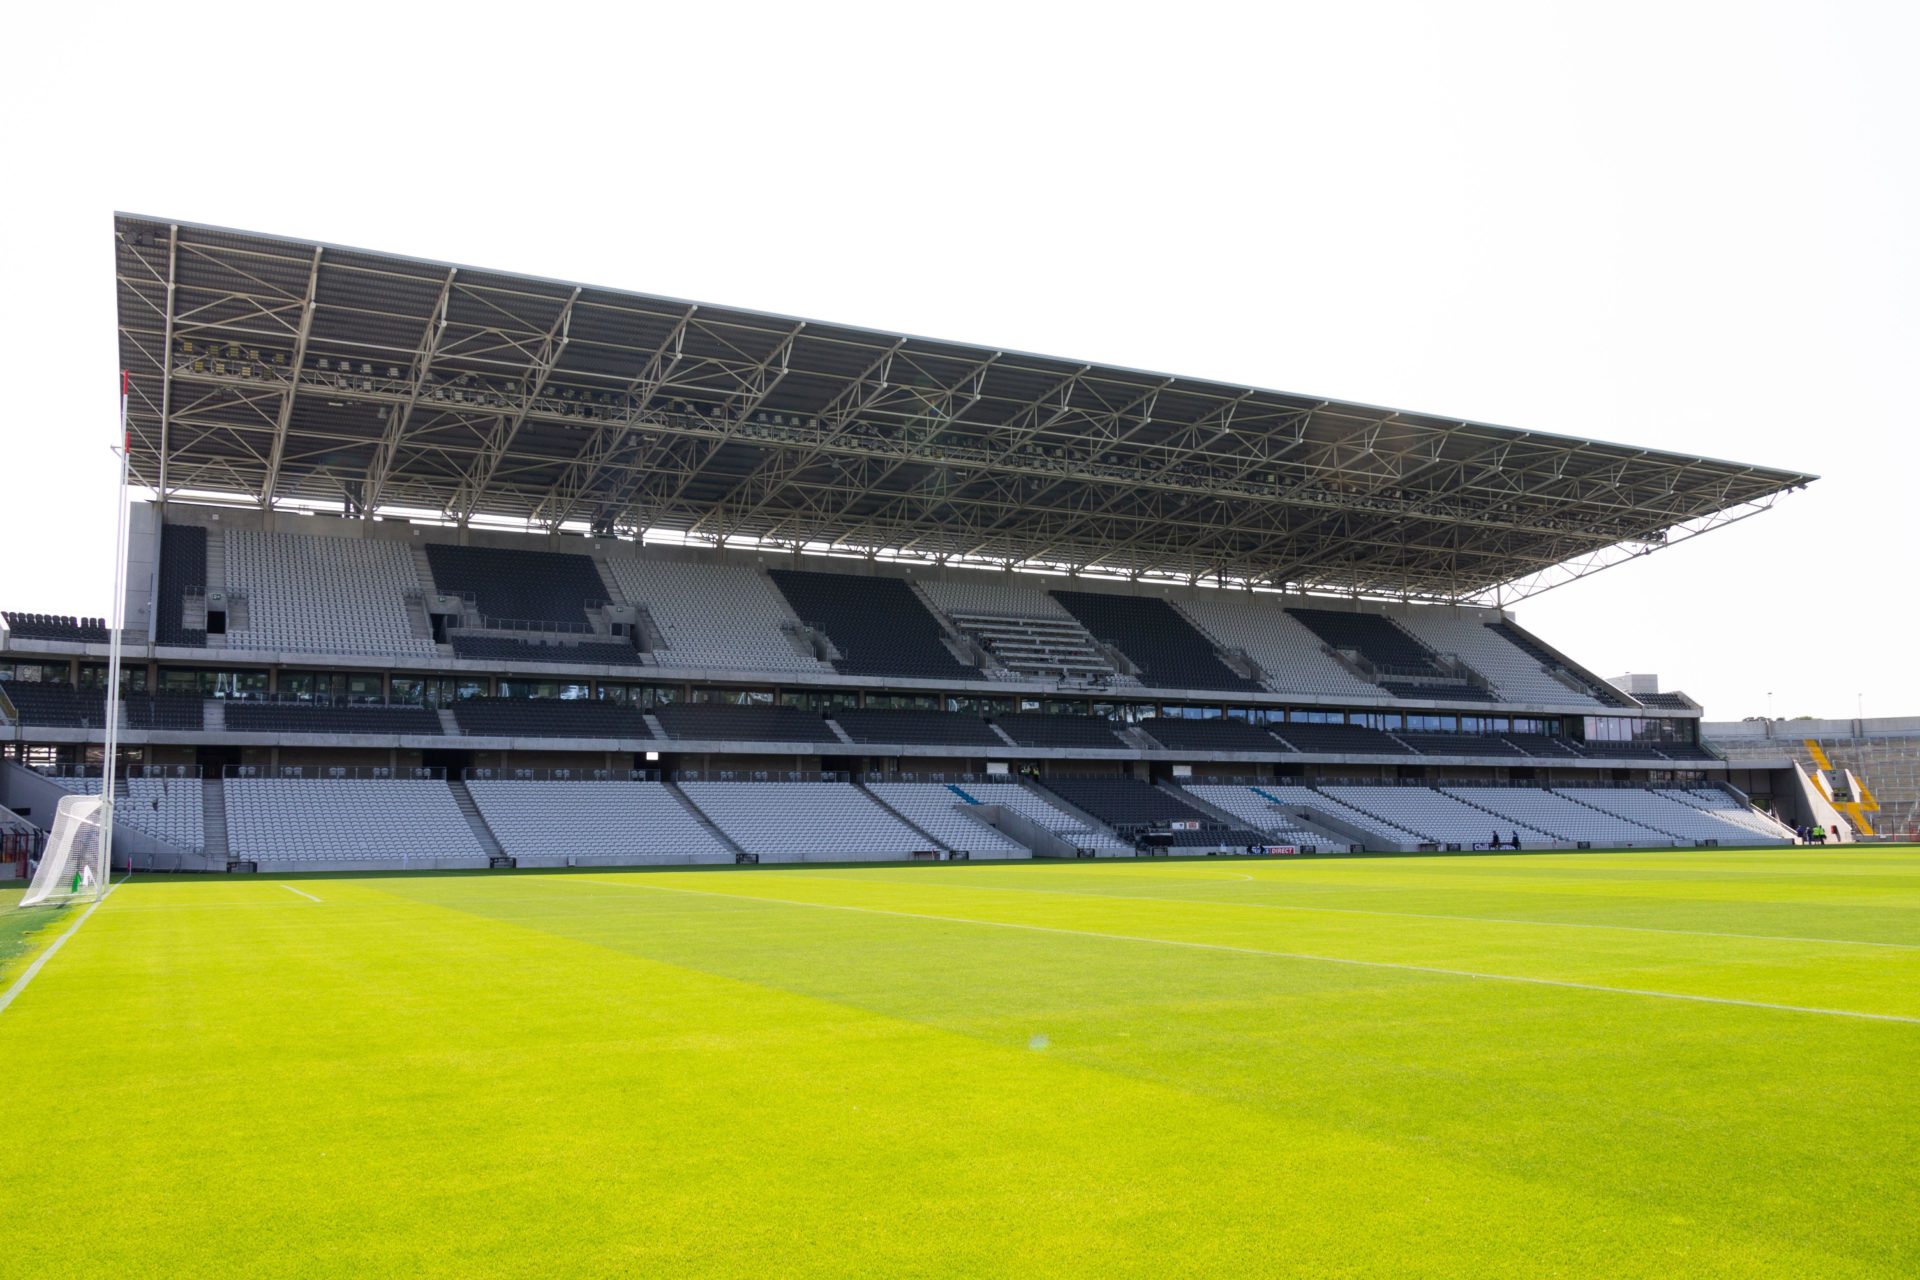 Páirc Uí Chaoimh proposed name change to SuperValu Pairc